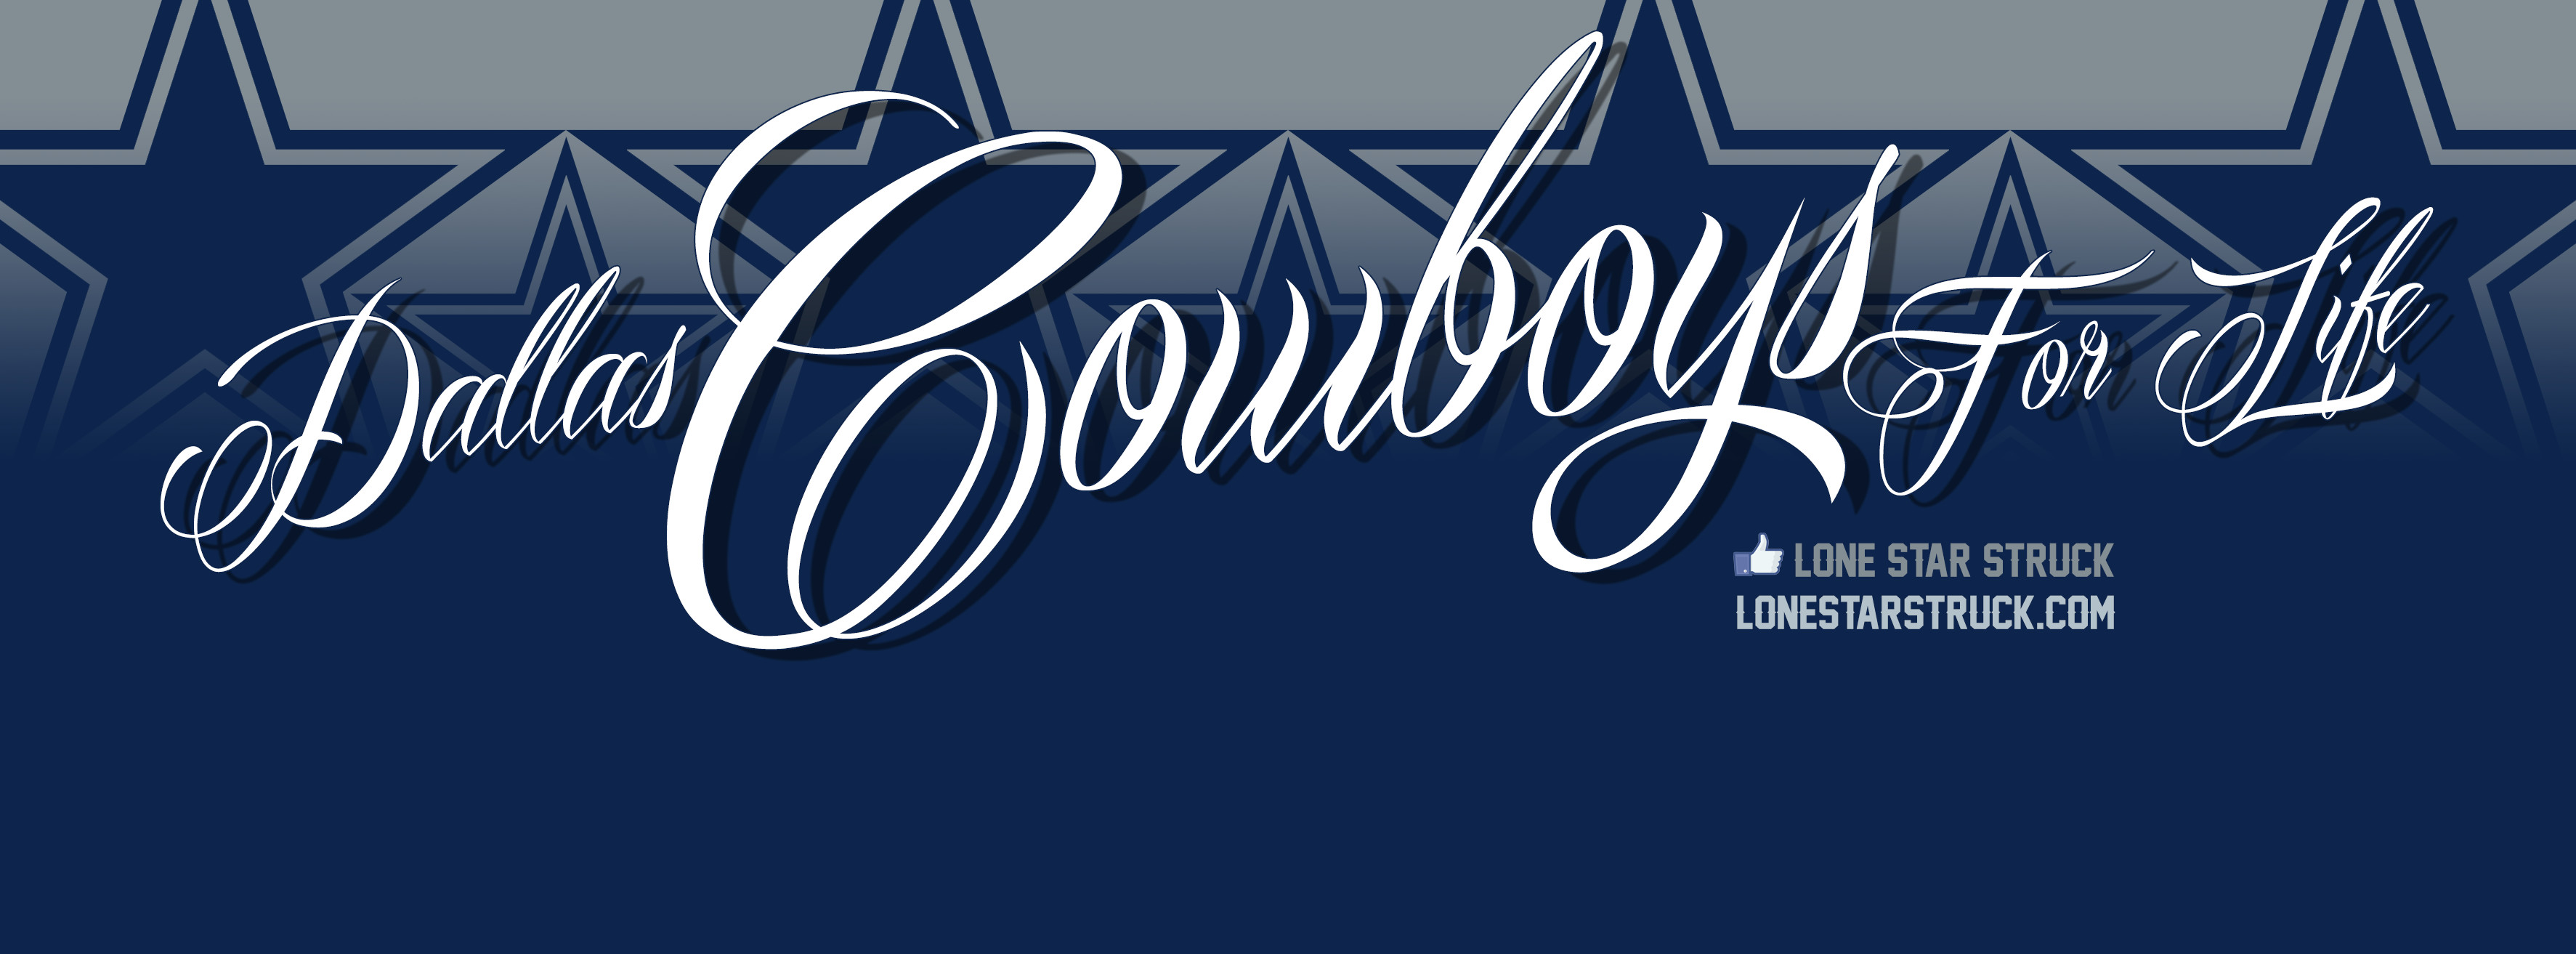 3546x1313 Dallas Cowboys For Life Covers – 6 variations